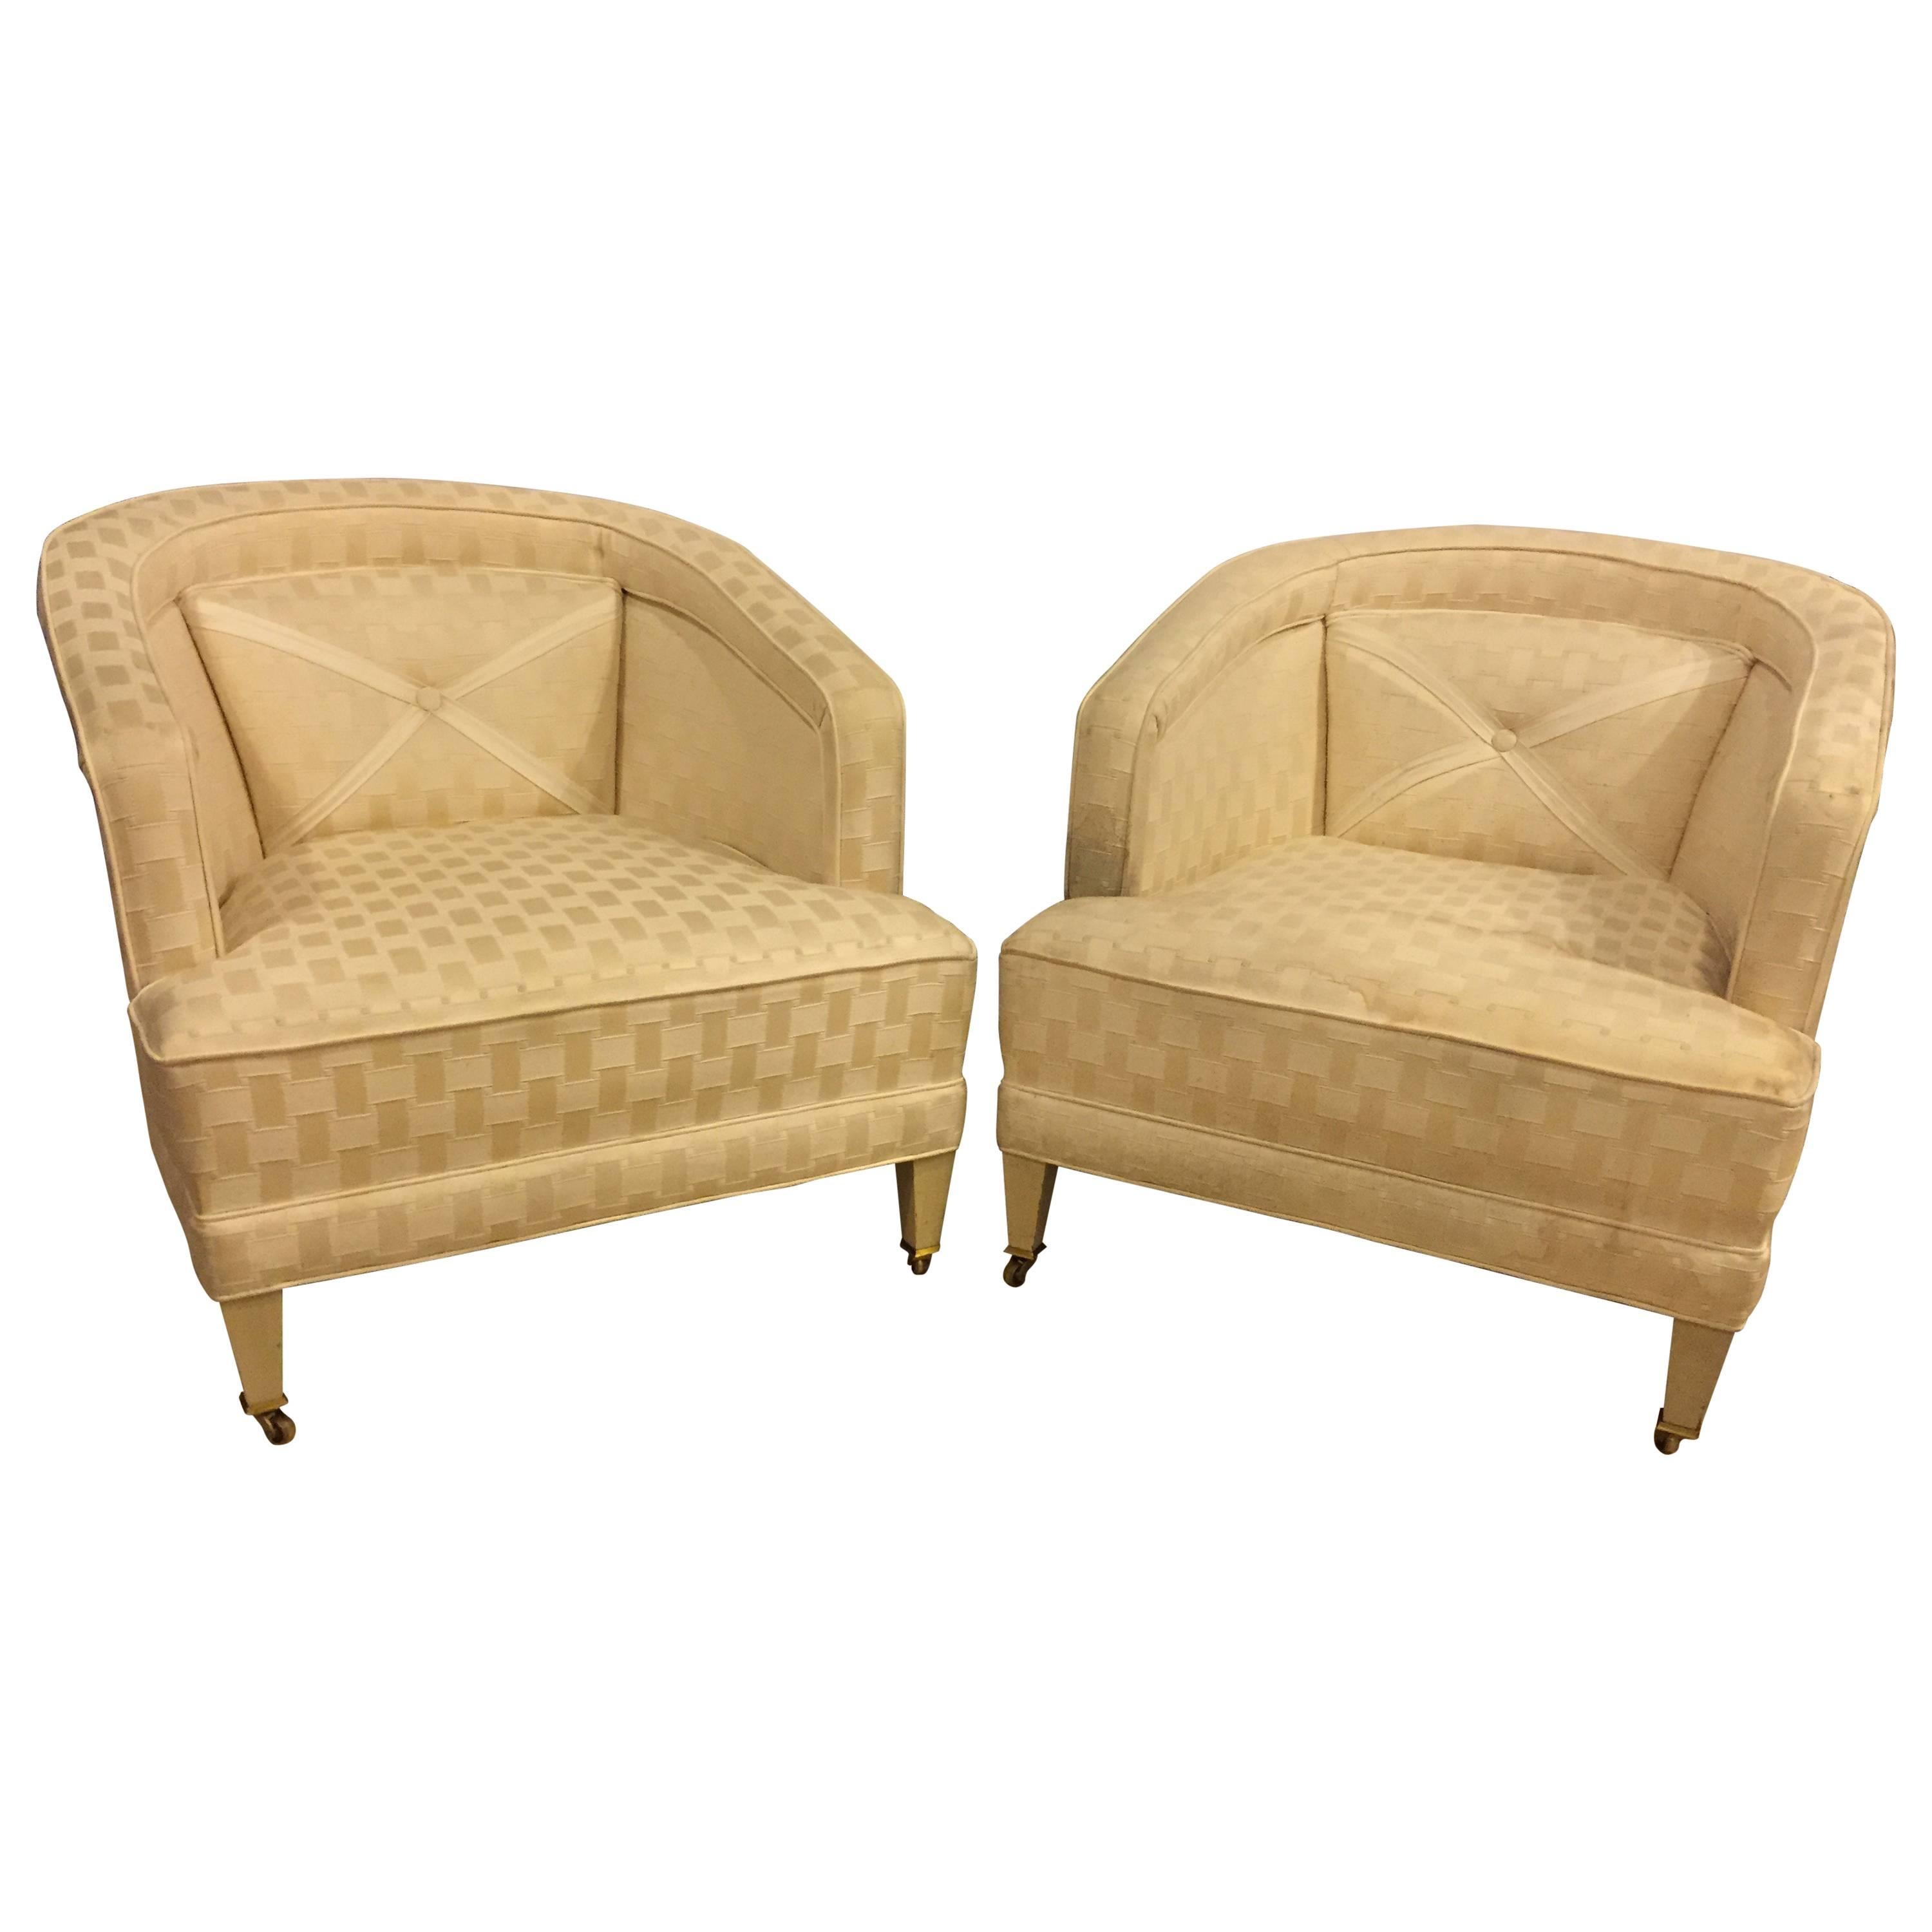 Pair of Hollywood Regency Style Dorothy Draper Style Lounge Chairs